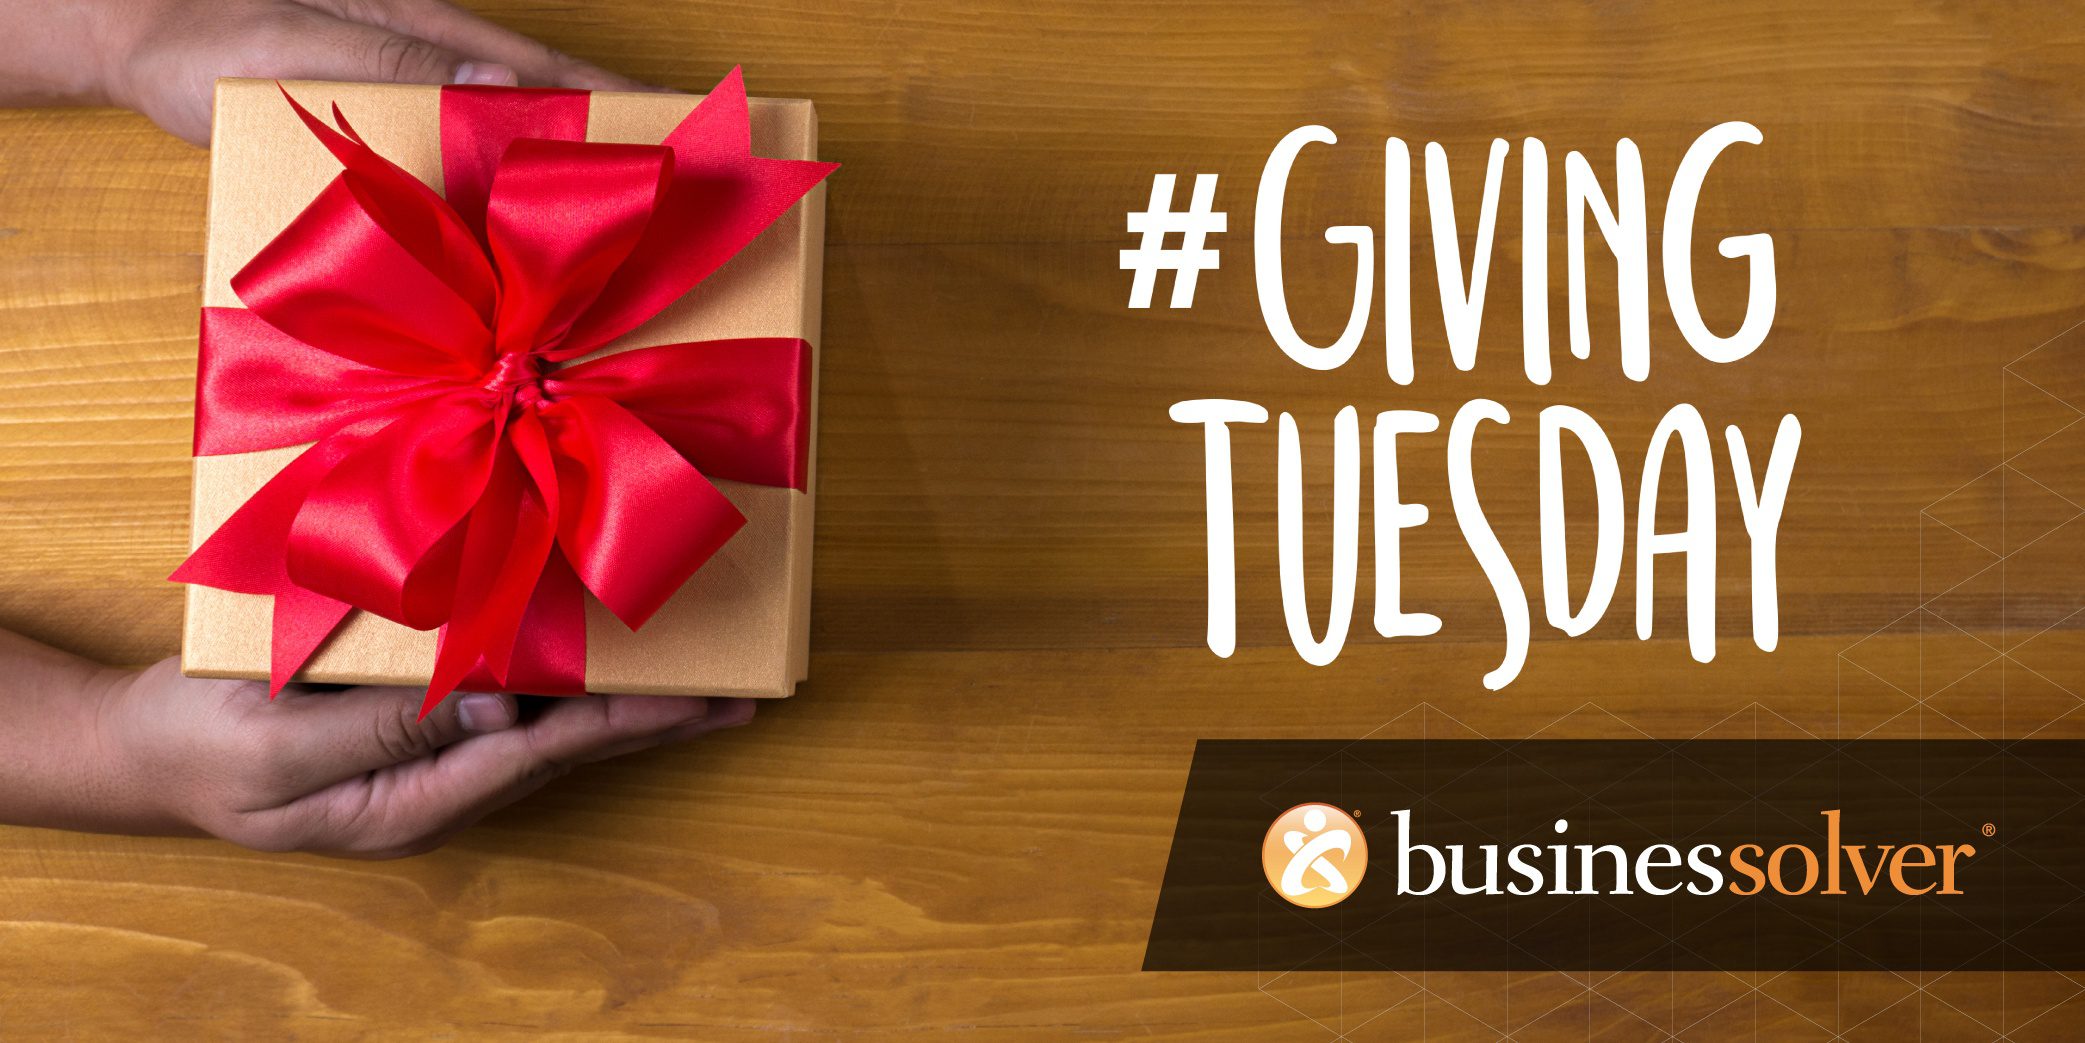 Giving-Tues-Image